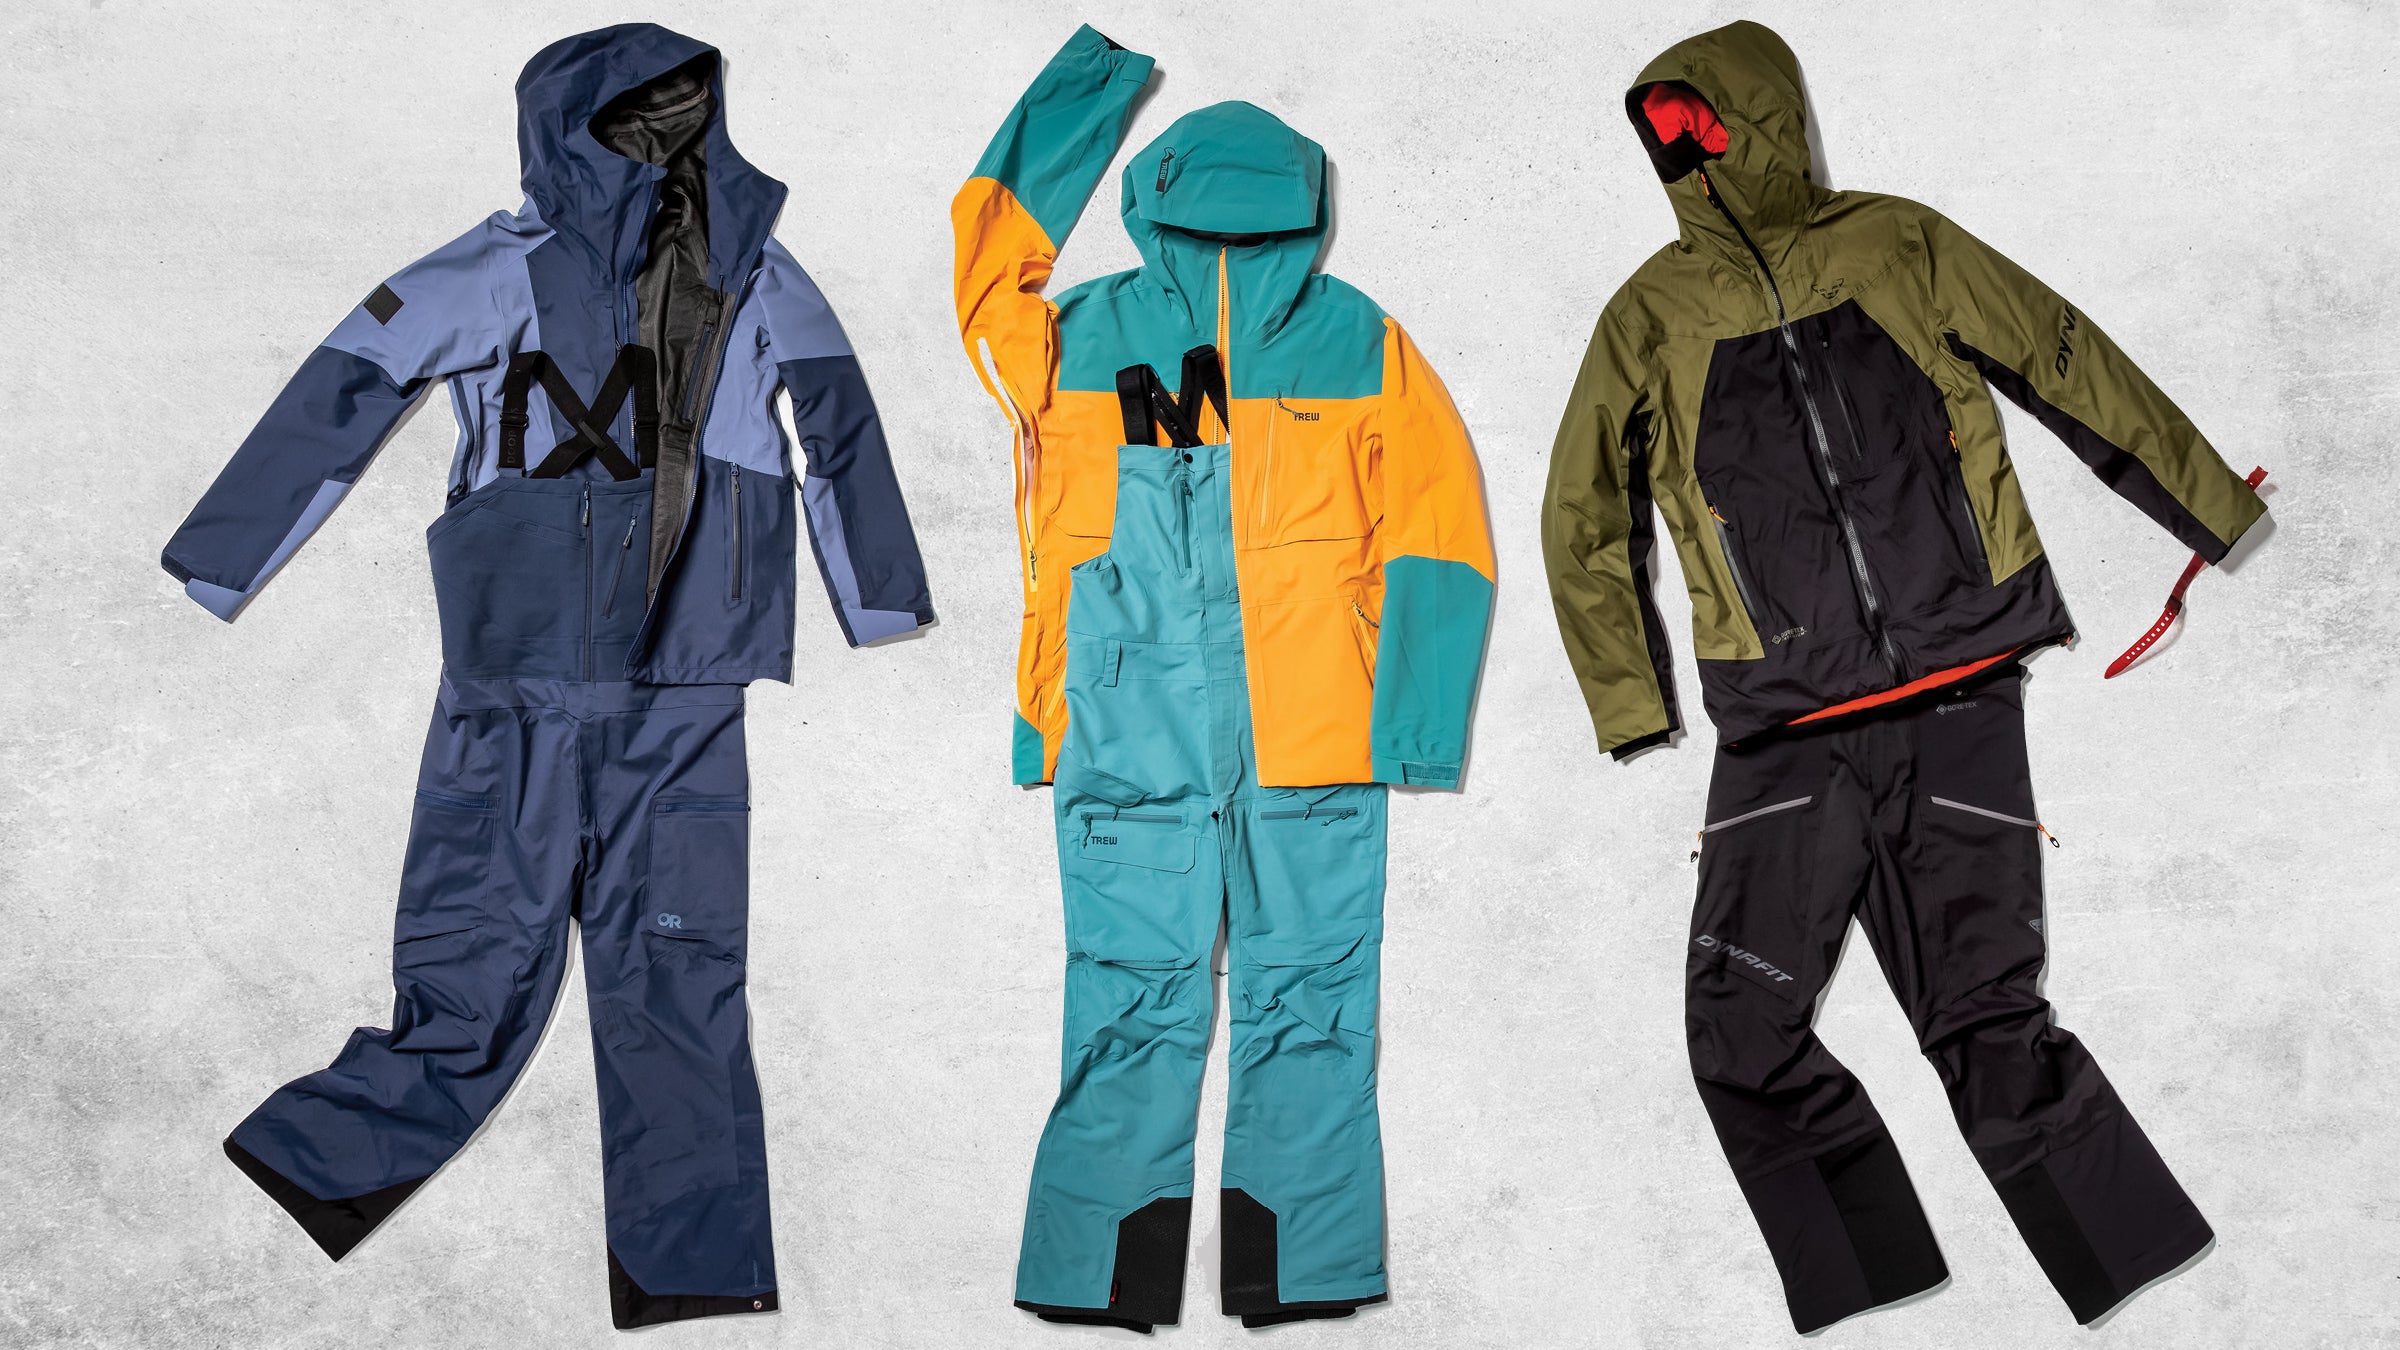 Skiwear Brand Spyder Plans Expansion in Europe